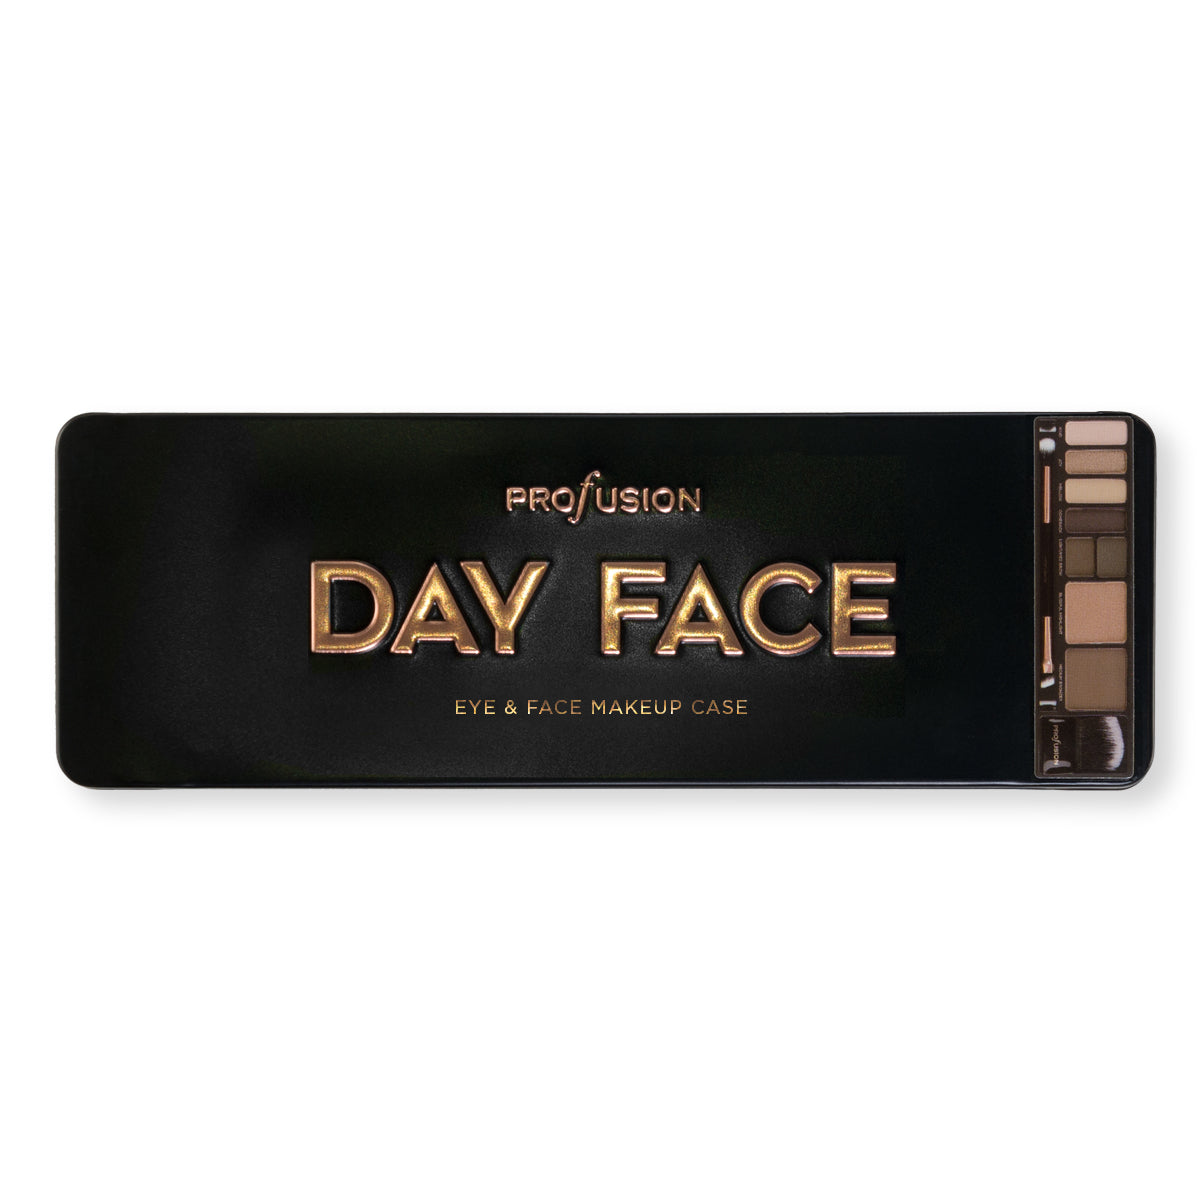 DAY FACE | Pro Makeup Case - profusion US